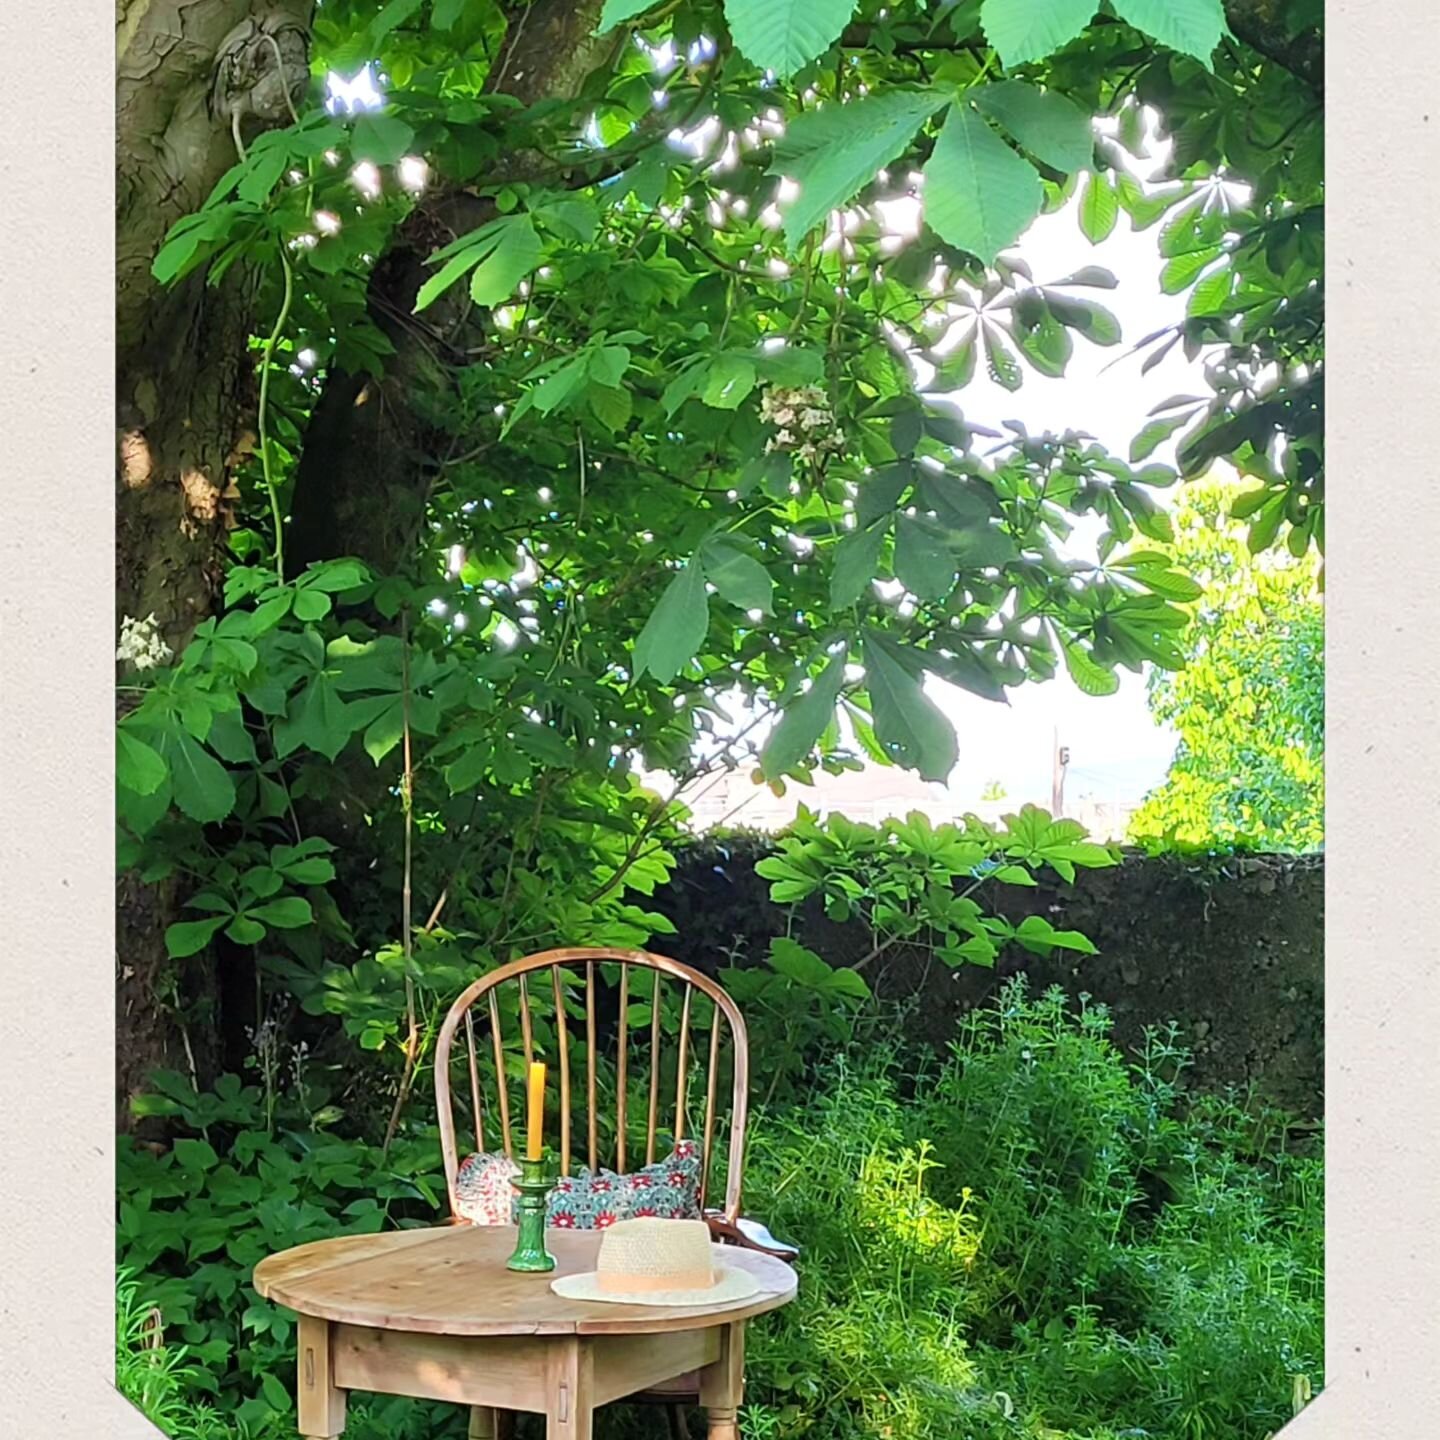 Perfect day spent in the garden photographing some of our lovely furniture ❤️ See our website for further information on our 19th Century elm Windsor armchair.